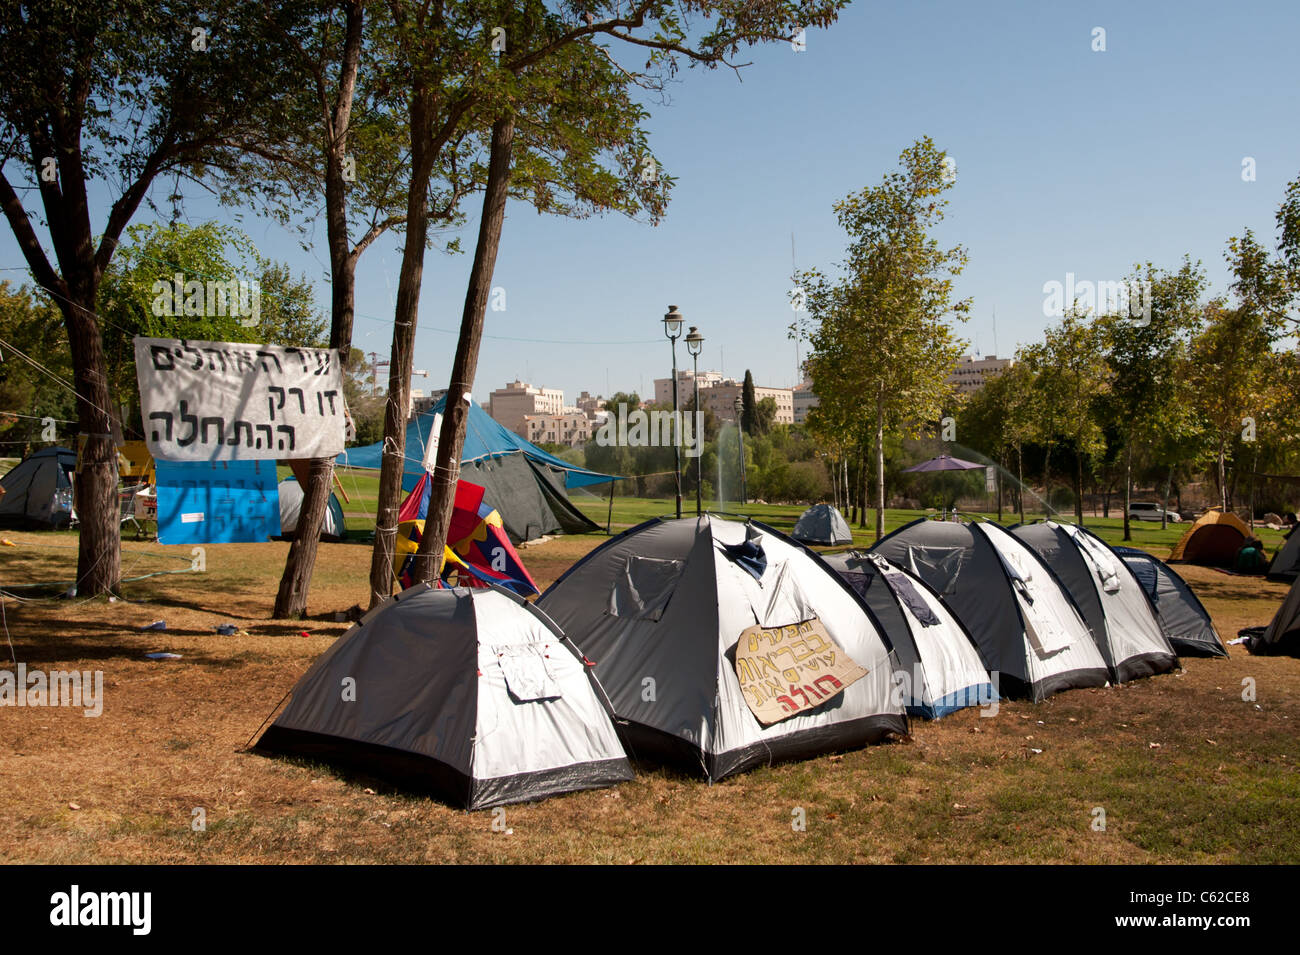 A tent city pitched as part of Israel's nationwide 'social justice' protest movement occupies Jerusalem's Independence Park. Stock Photo